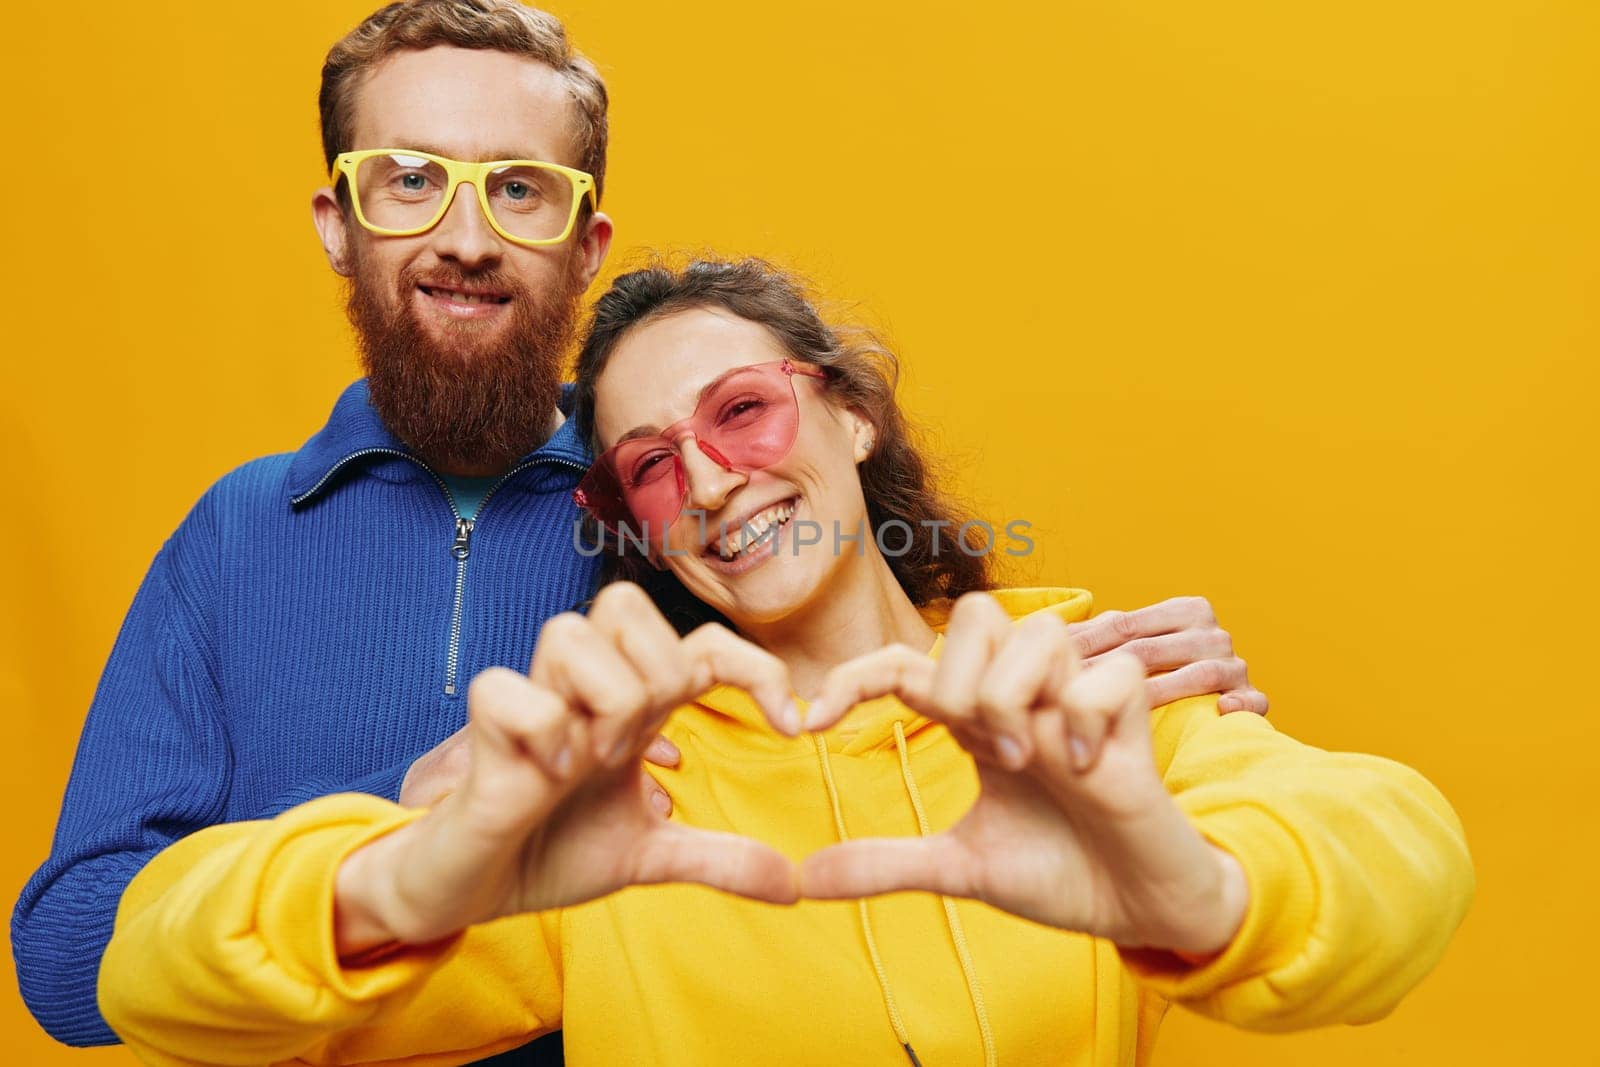 Man and woman couple smiling cheerfully and crooked with glasses, on yellow background, symbols signs and hand gestures, family shoot, newlyweds. by SHOTPRIME